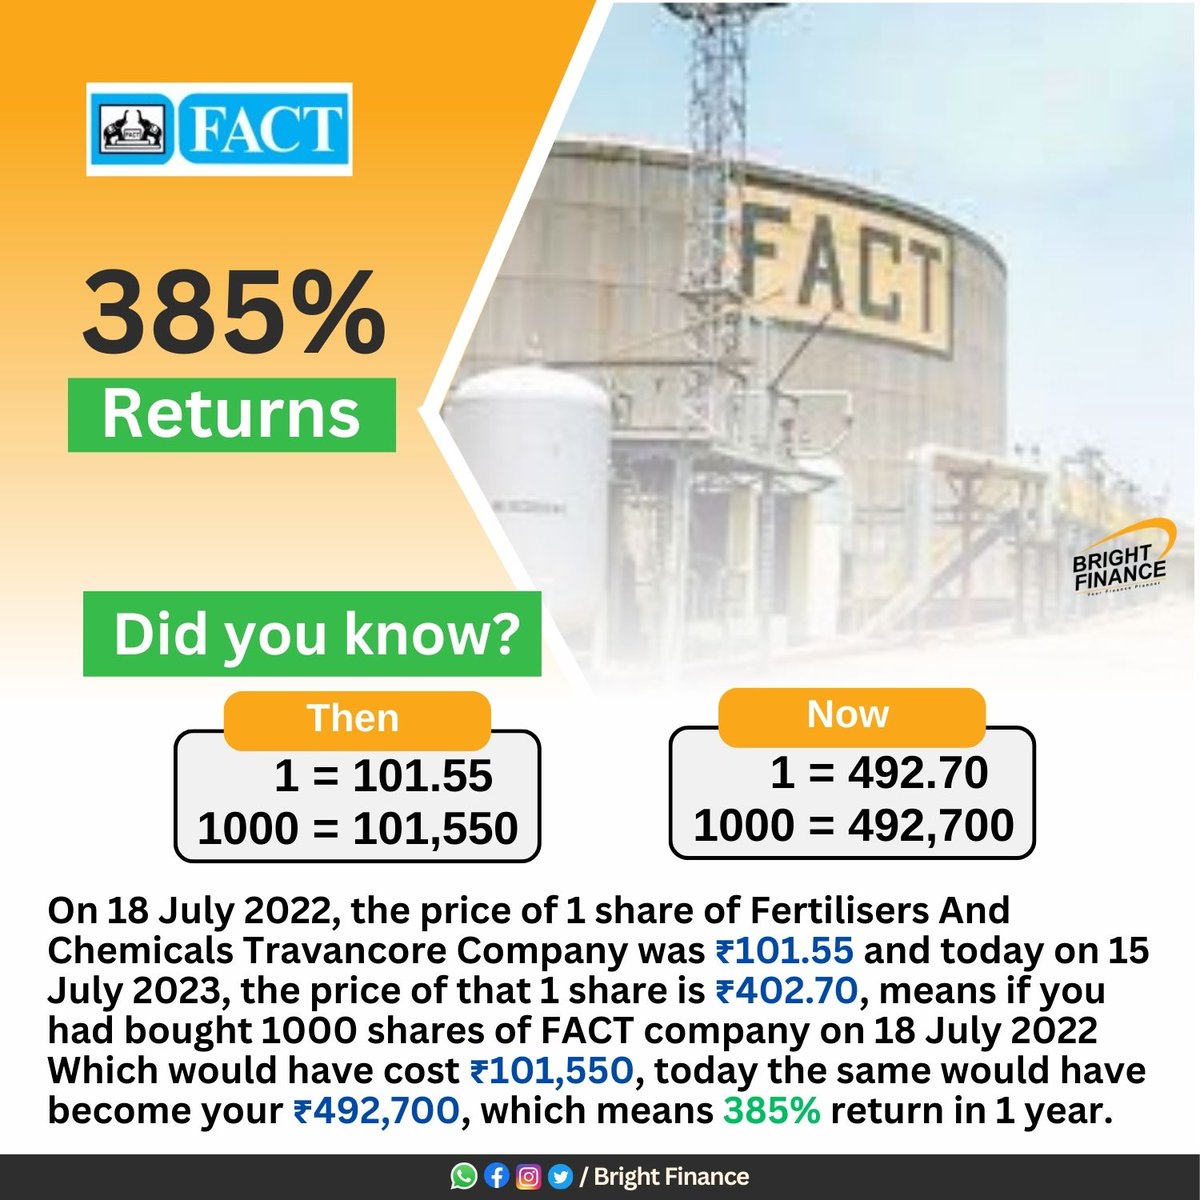 🚀 Fact Company's stock price has skyrocketed, delivering an incredible 385% return in just one year! 📊🔥
Invest wisely and join the journey to financial prosperity! 💰💼

#Fact #StockMarketGains #Financial #StockMarket #Investment #Stocks #Growth #Wealth #Profit  #BrightFinance